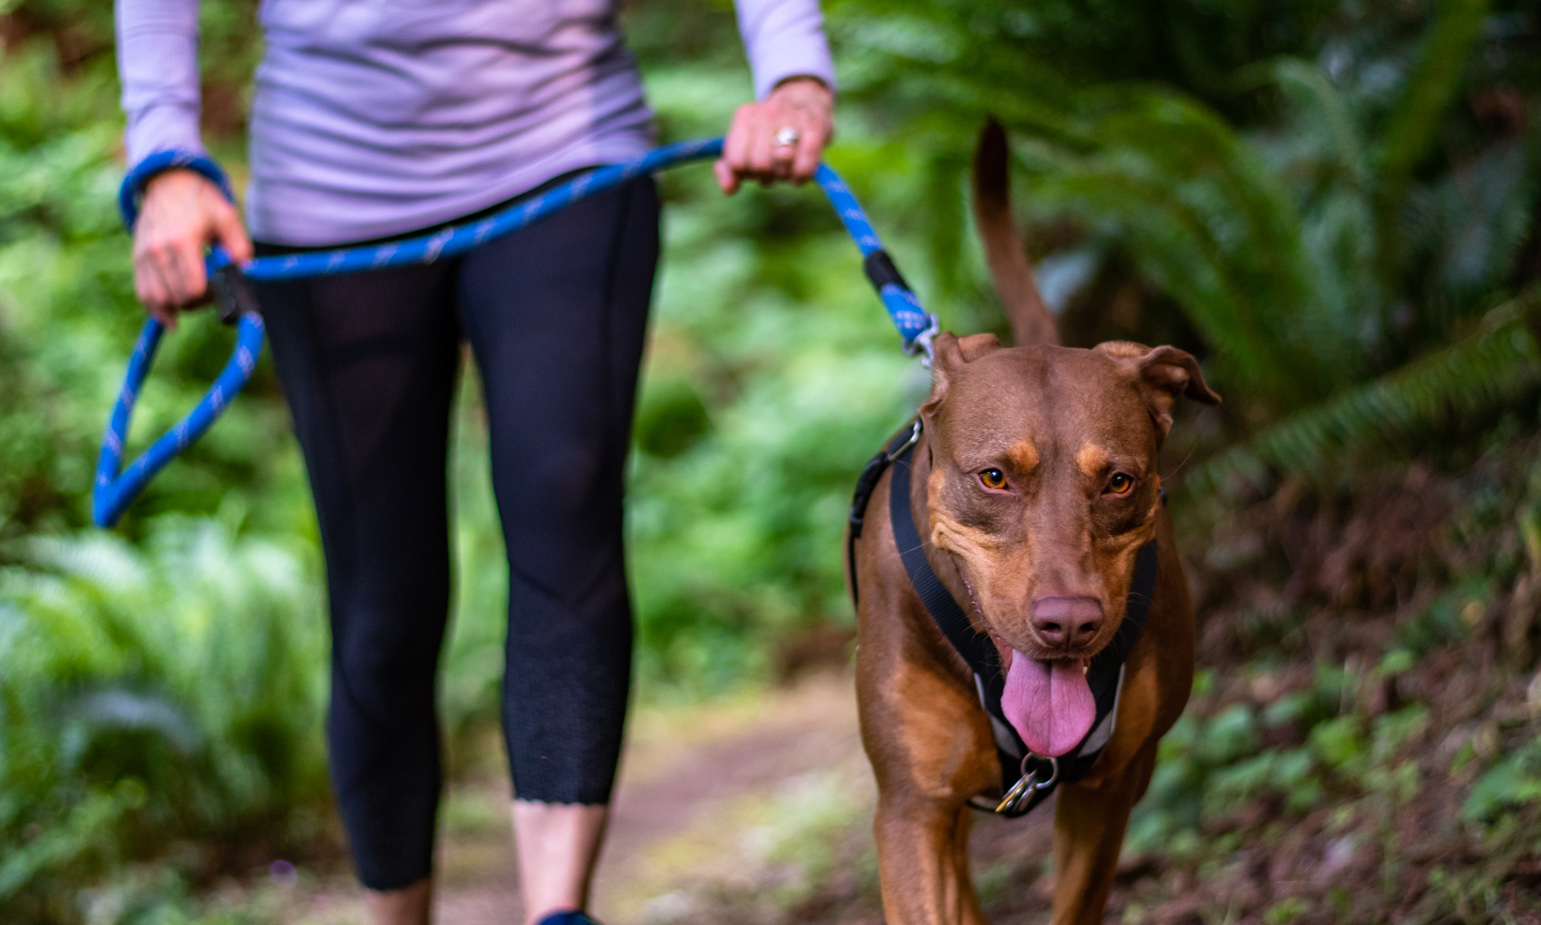 Athletic dog in foreground being walked by woman in outdoor athletic attire as they hike along path through forest